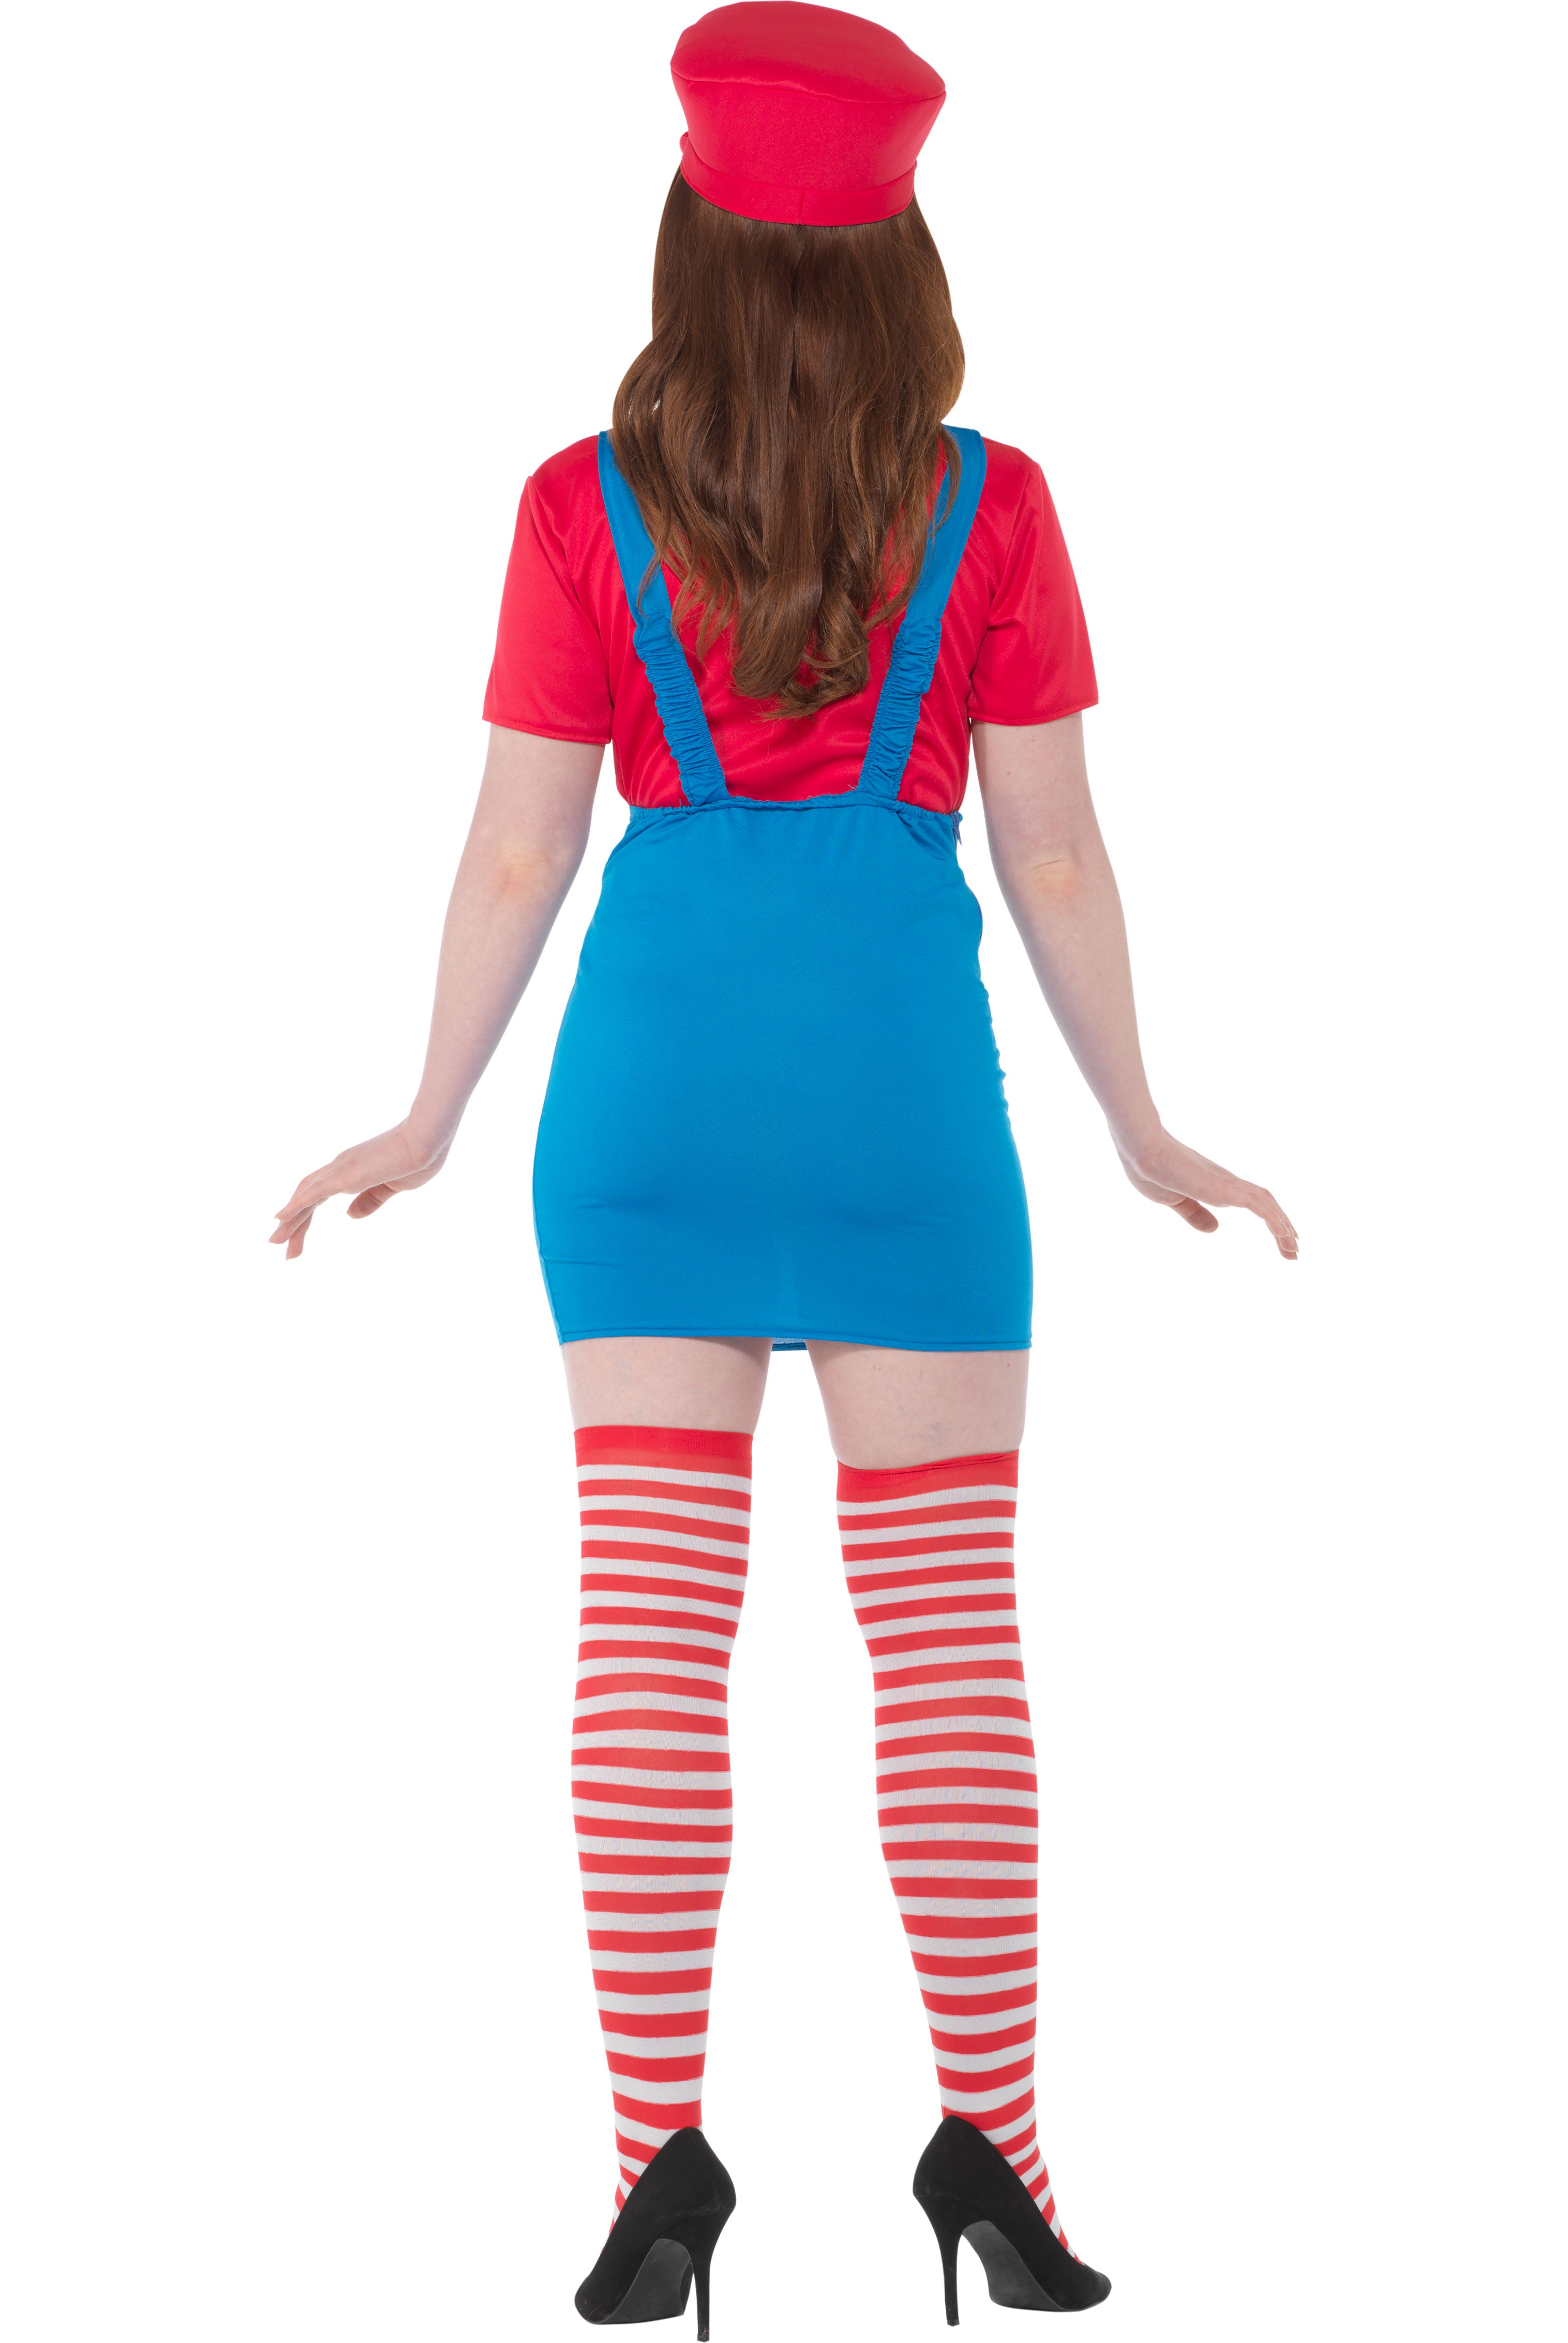 Costume - Plumber Dress Red Adult